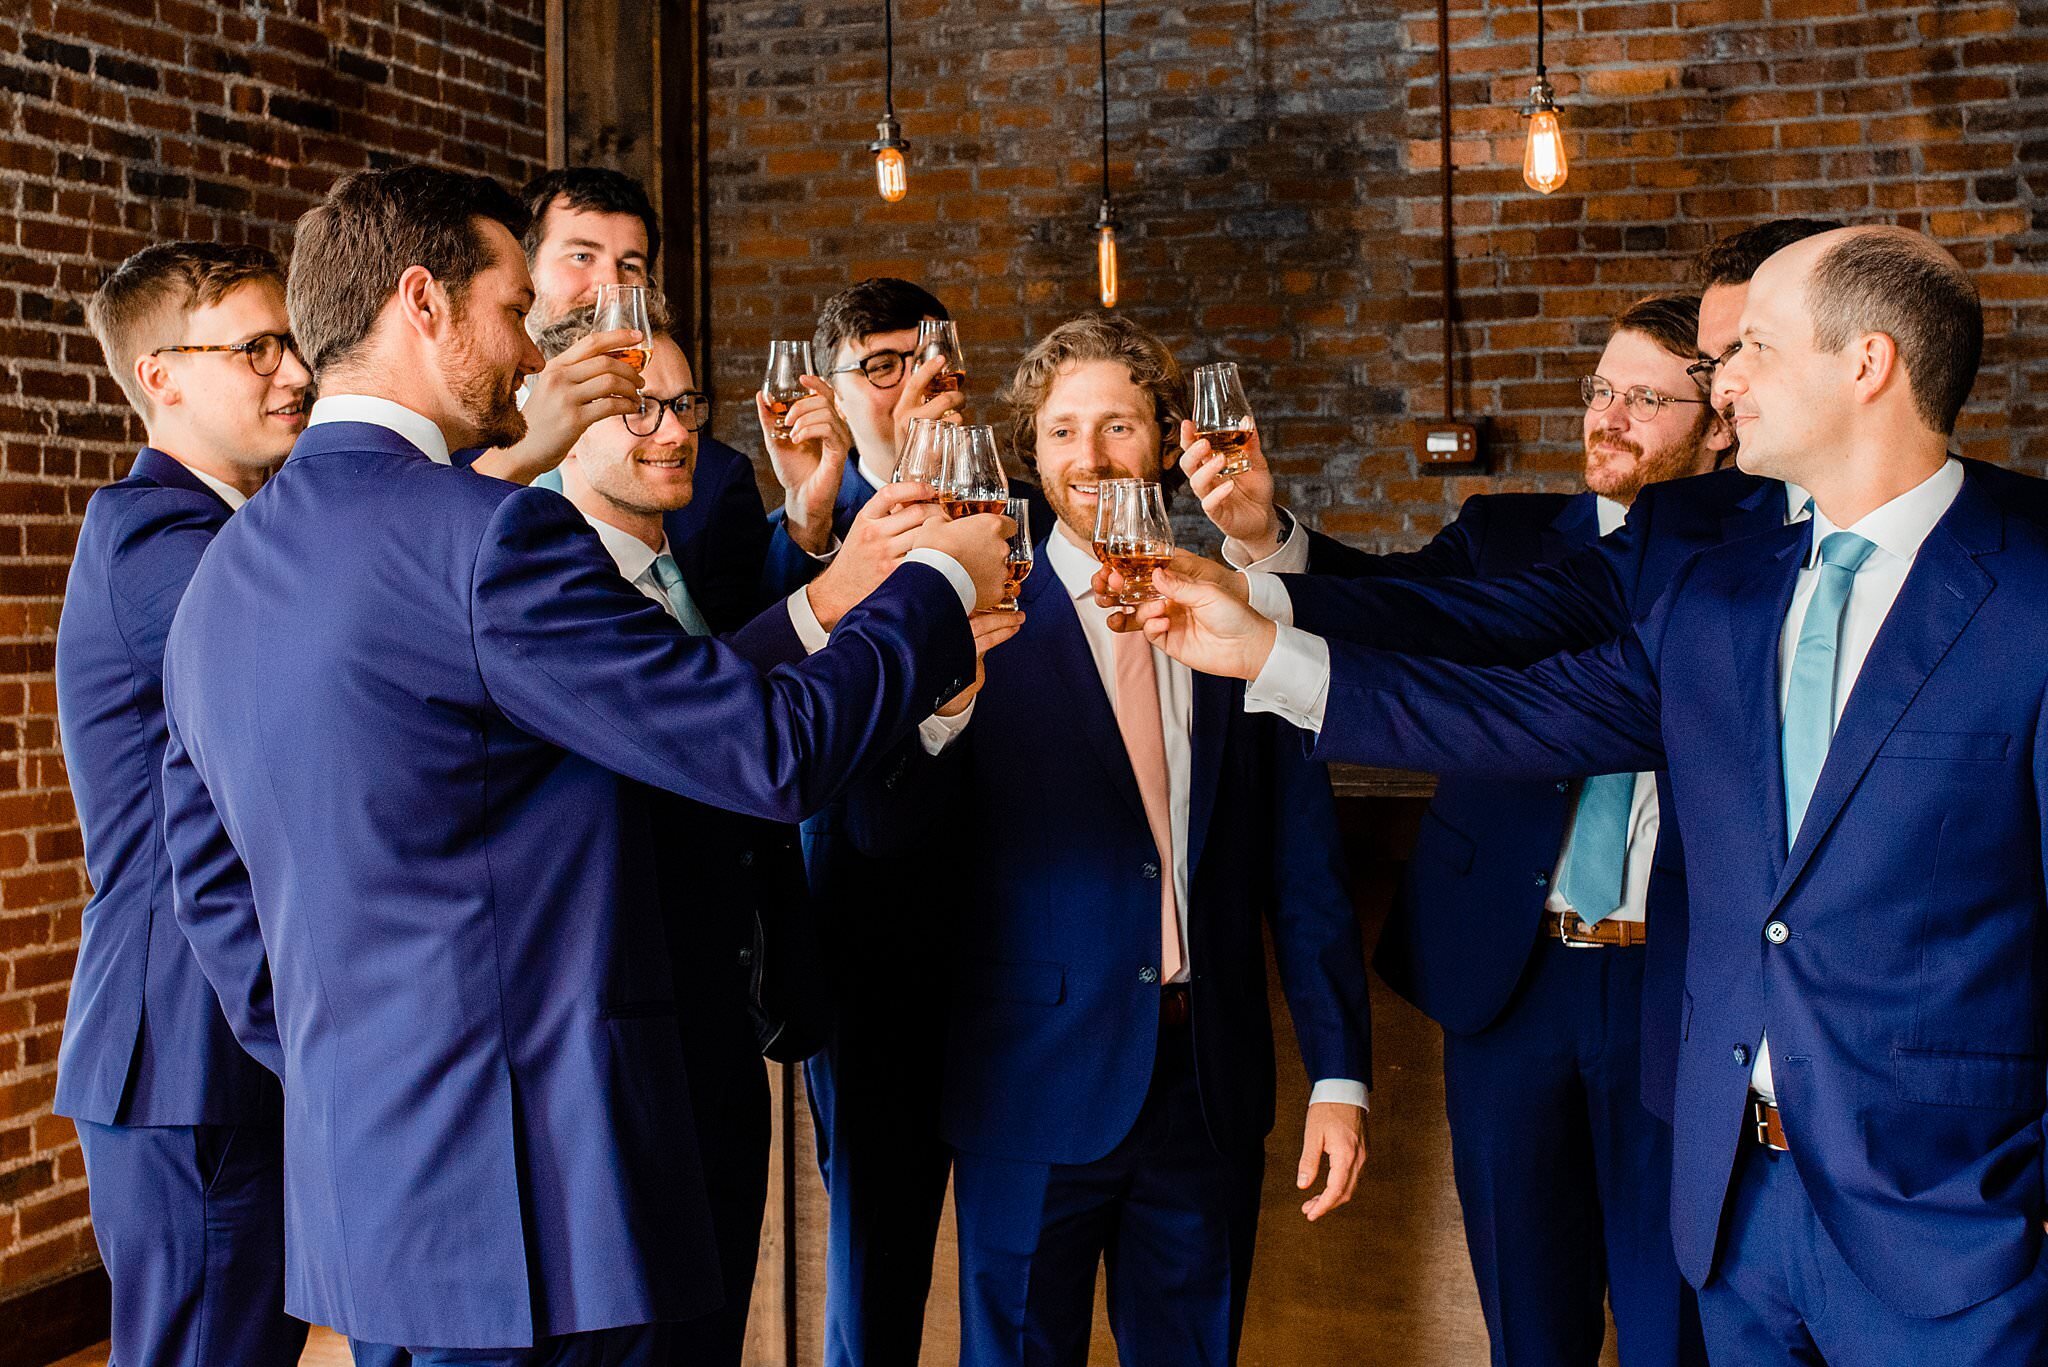 Groom sharing a bourbon toast with his groomsmen